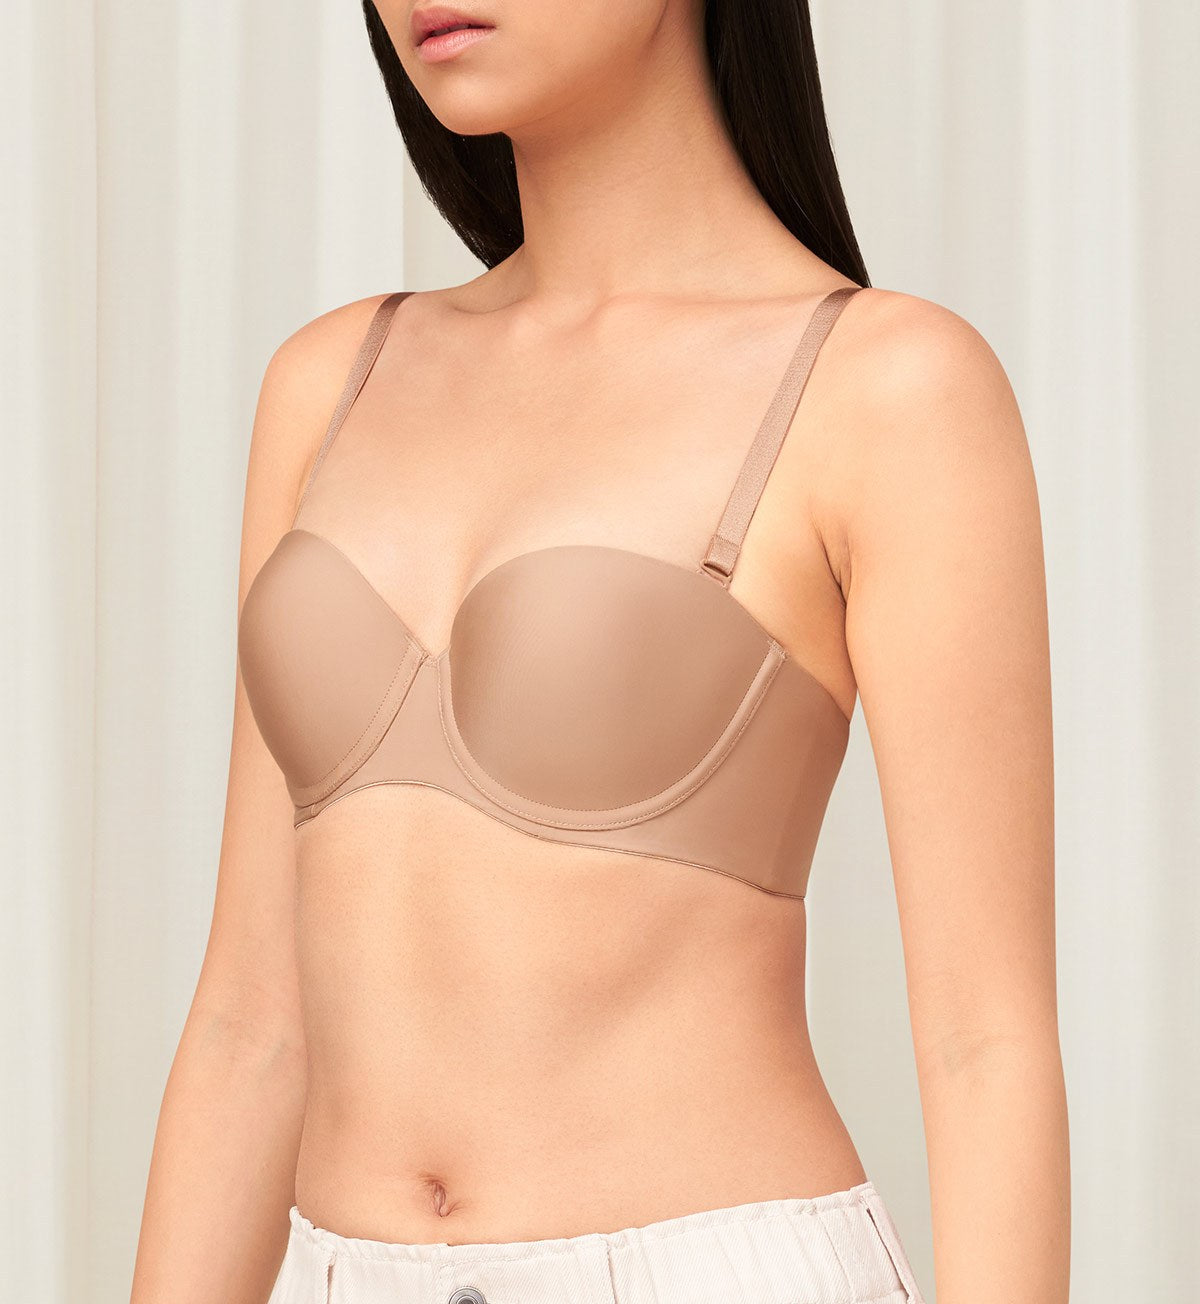 Body Make Up Wired Push Up Bra With Detachable Straps in Smooth Skin